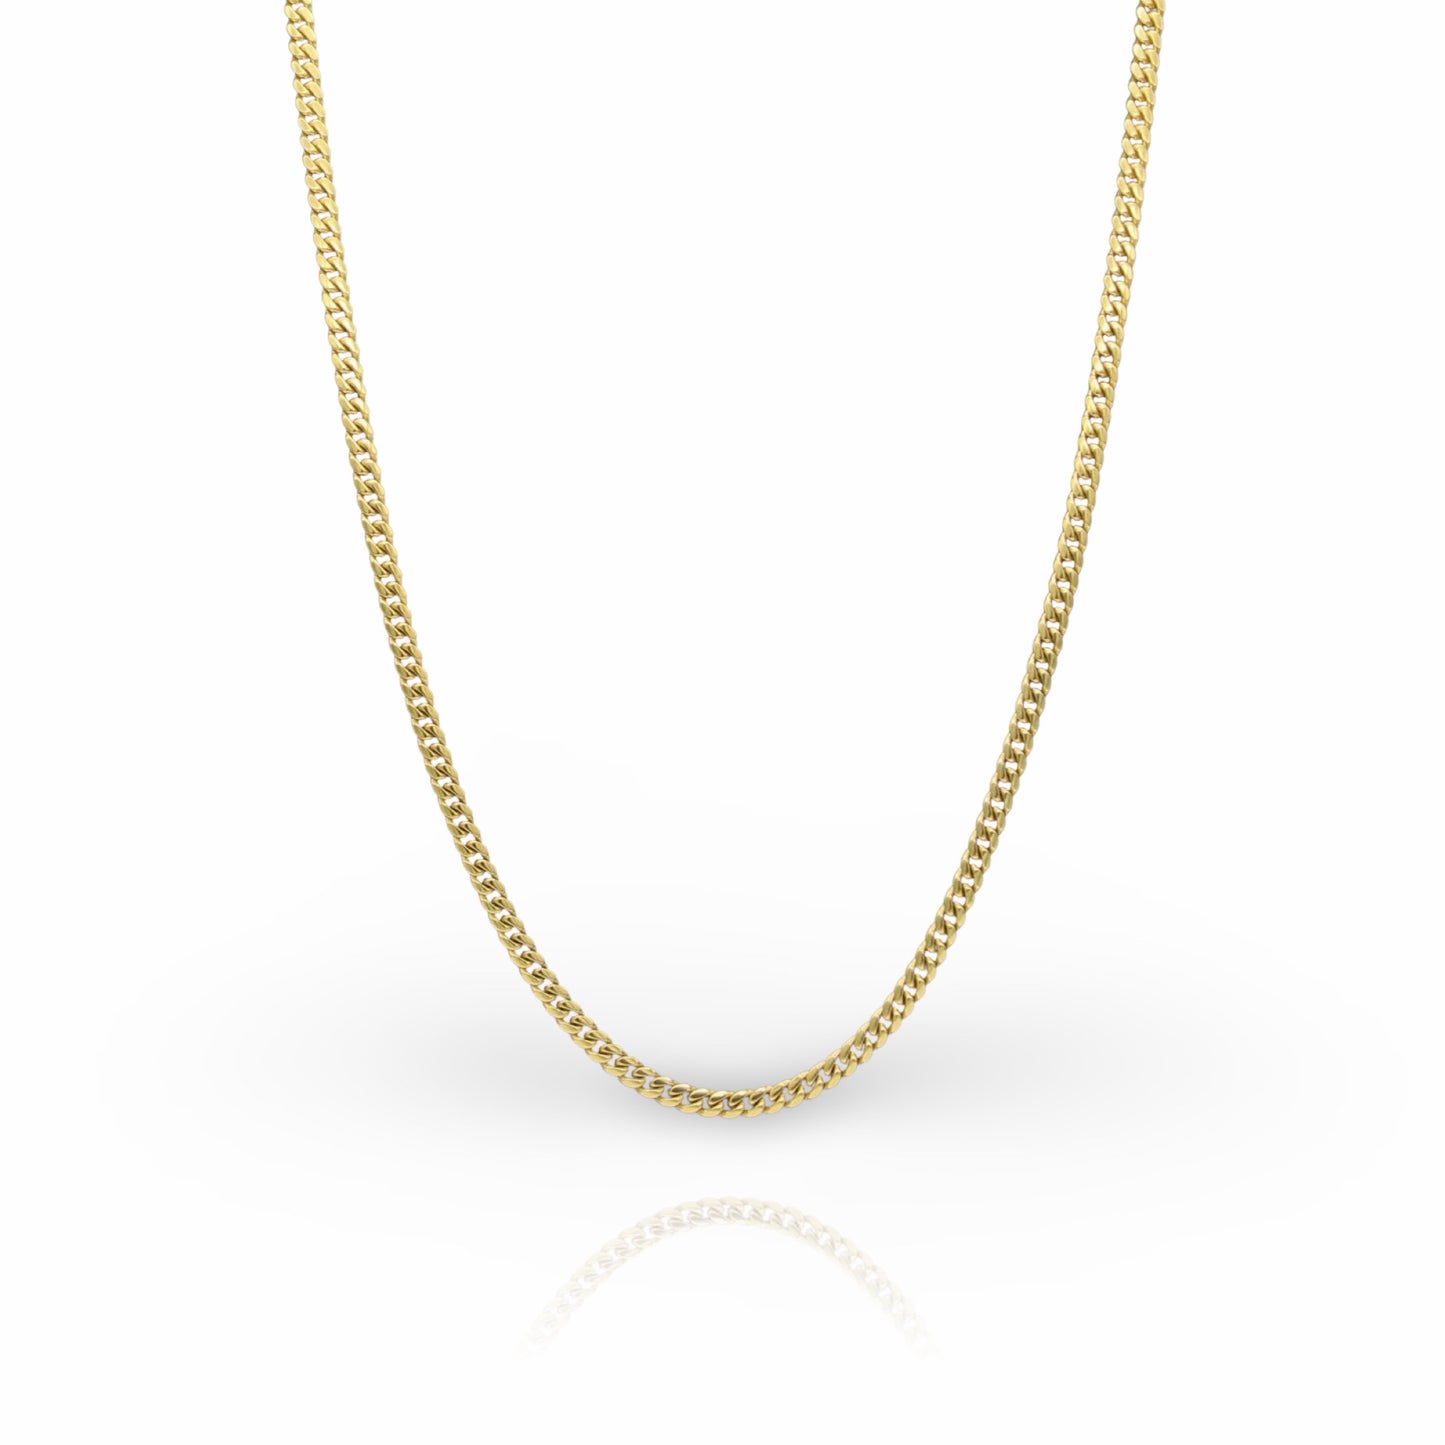 10K Solid Yellow Gold Cuban Link Chain From 3 mm to 5 mm